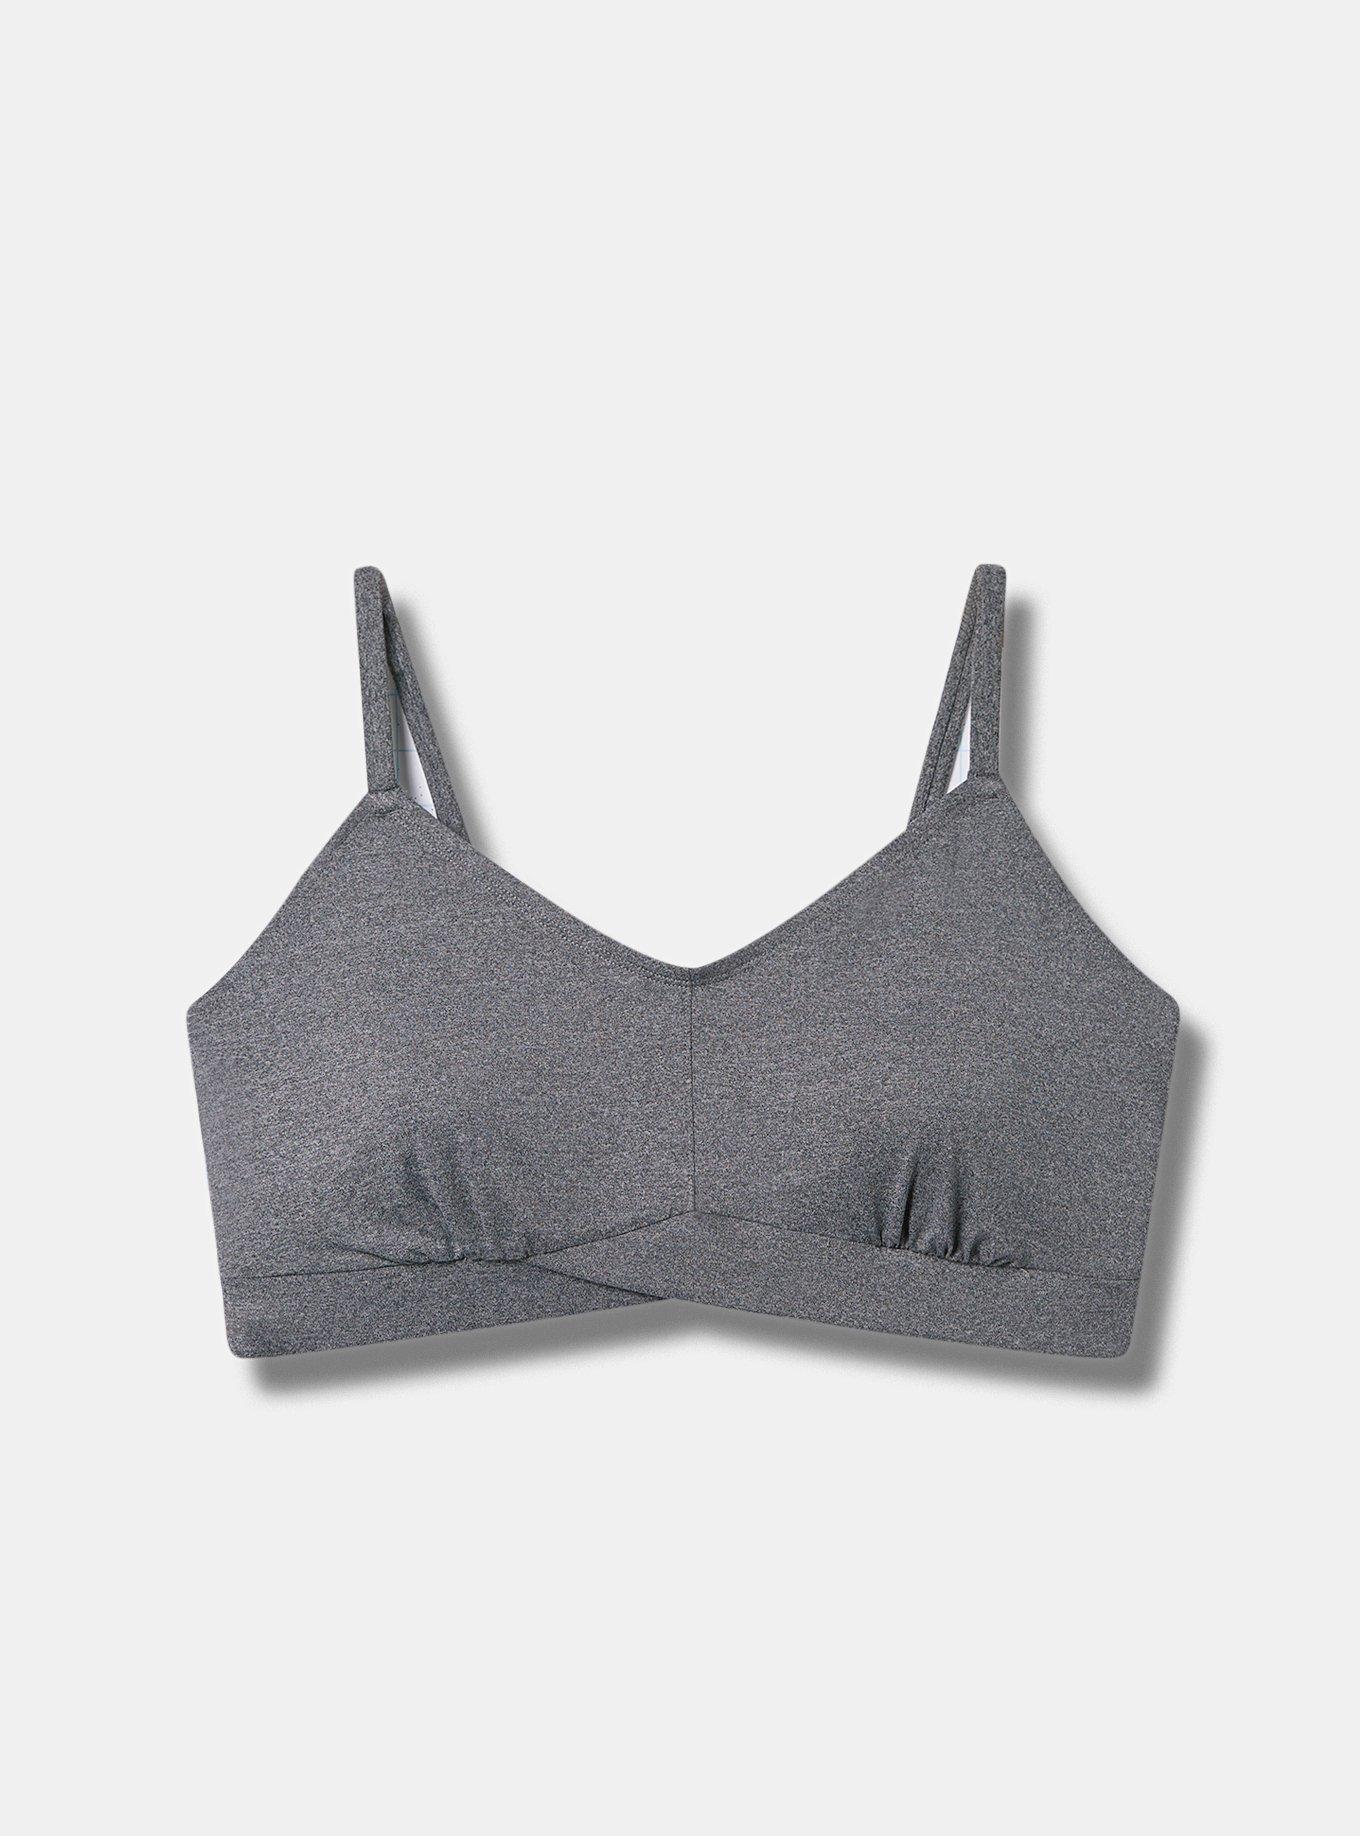 Hanes Sport Women's Size Small Charcoal Heather Gray Padded